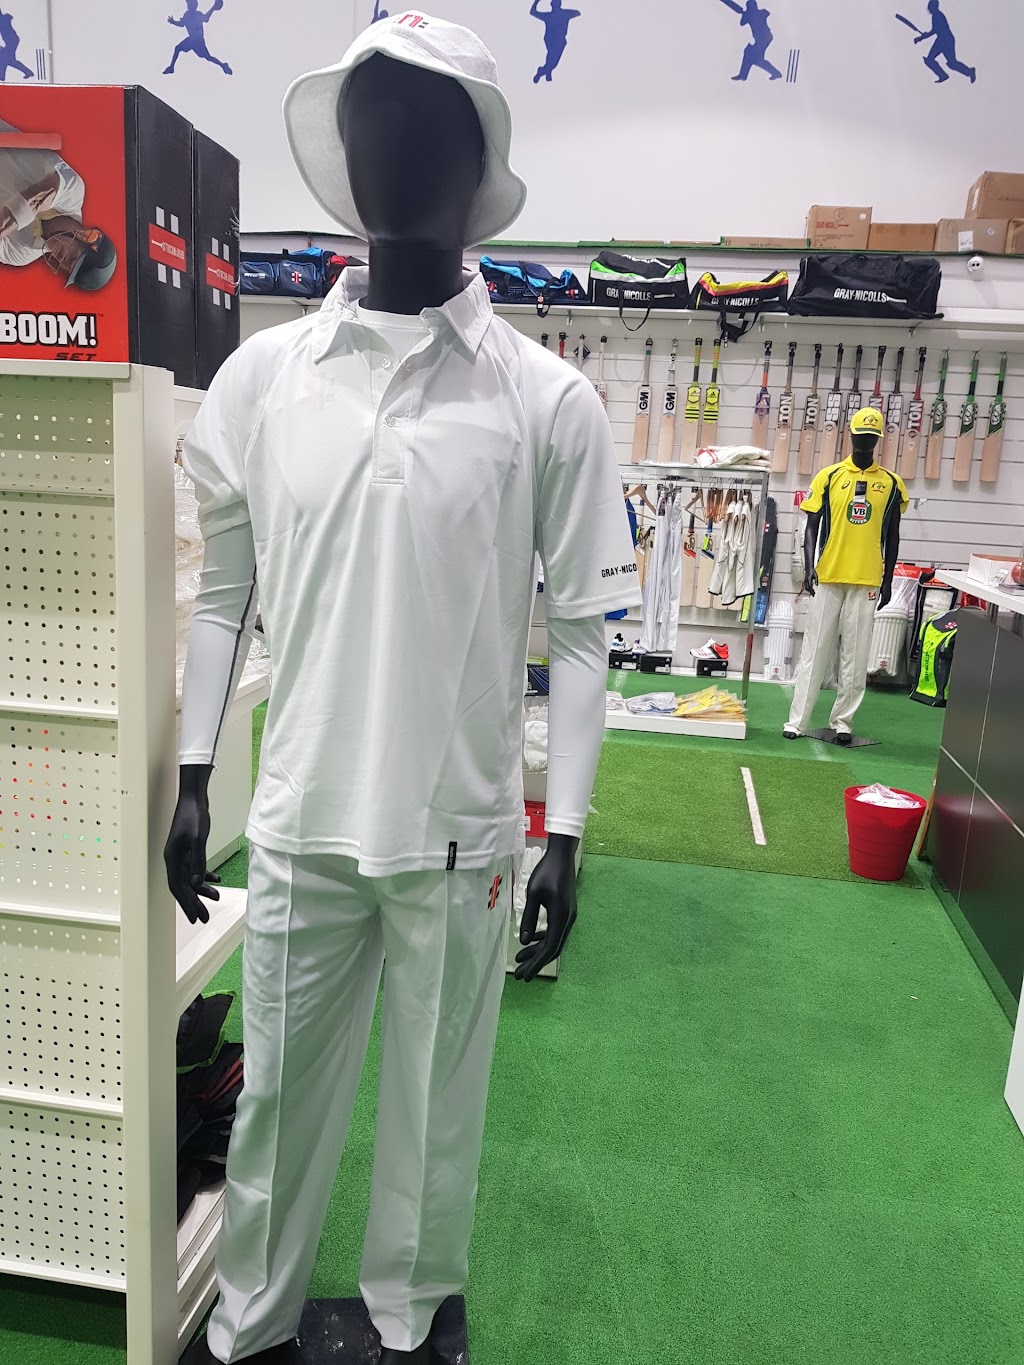 Western Sports Centre - Home of Cricket | store | Western Sports Centre 2, 310 Foleys Rd, Derrimut VIC 3026, Australia | 0488640270 OR +61 488 640 270